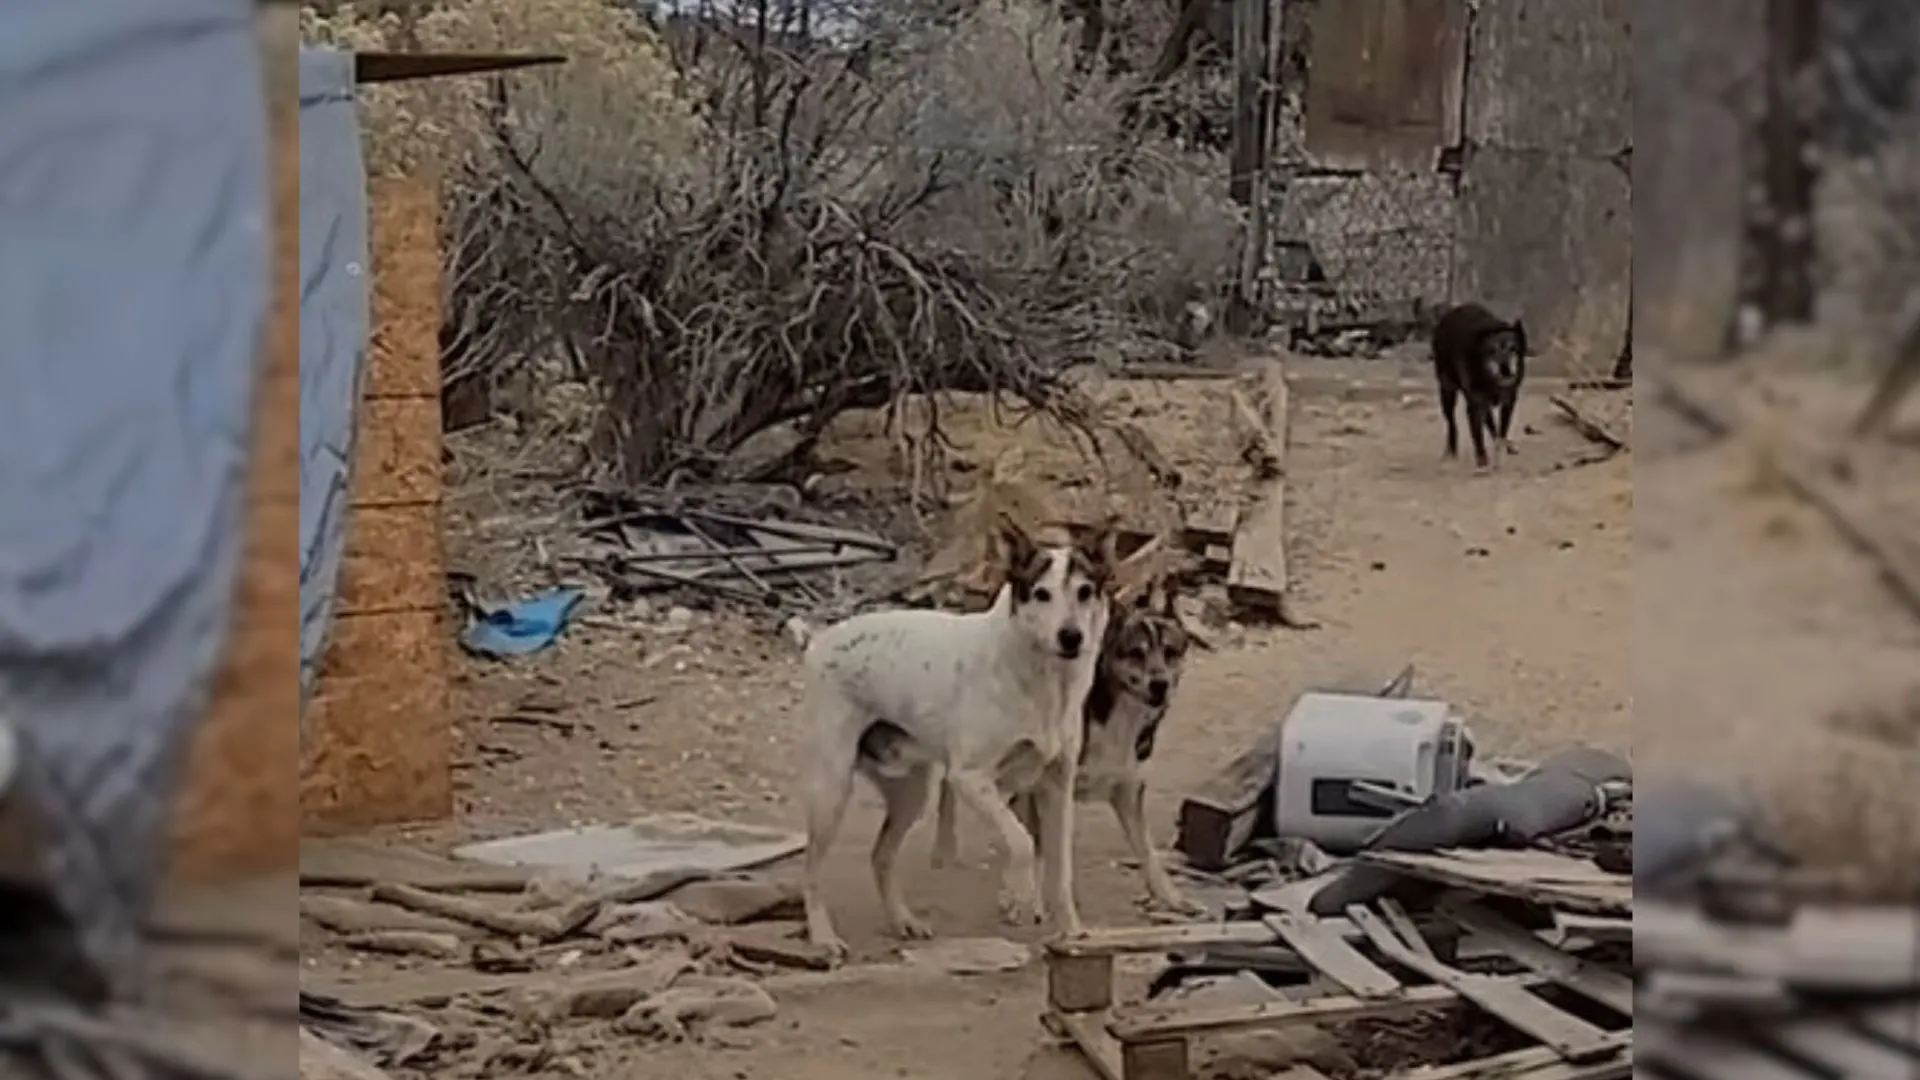 Guy Finally Manages To Win Over A Stray Dog After Months Of Trying